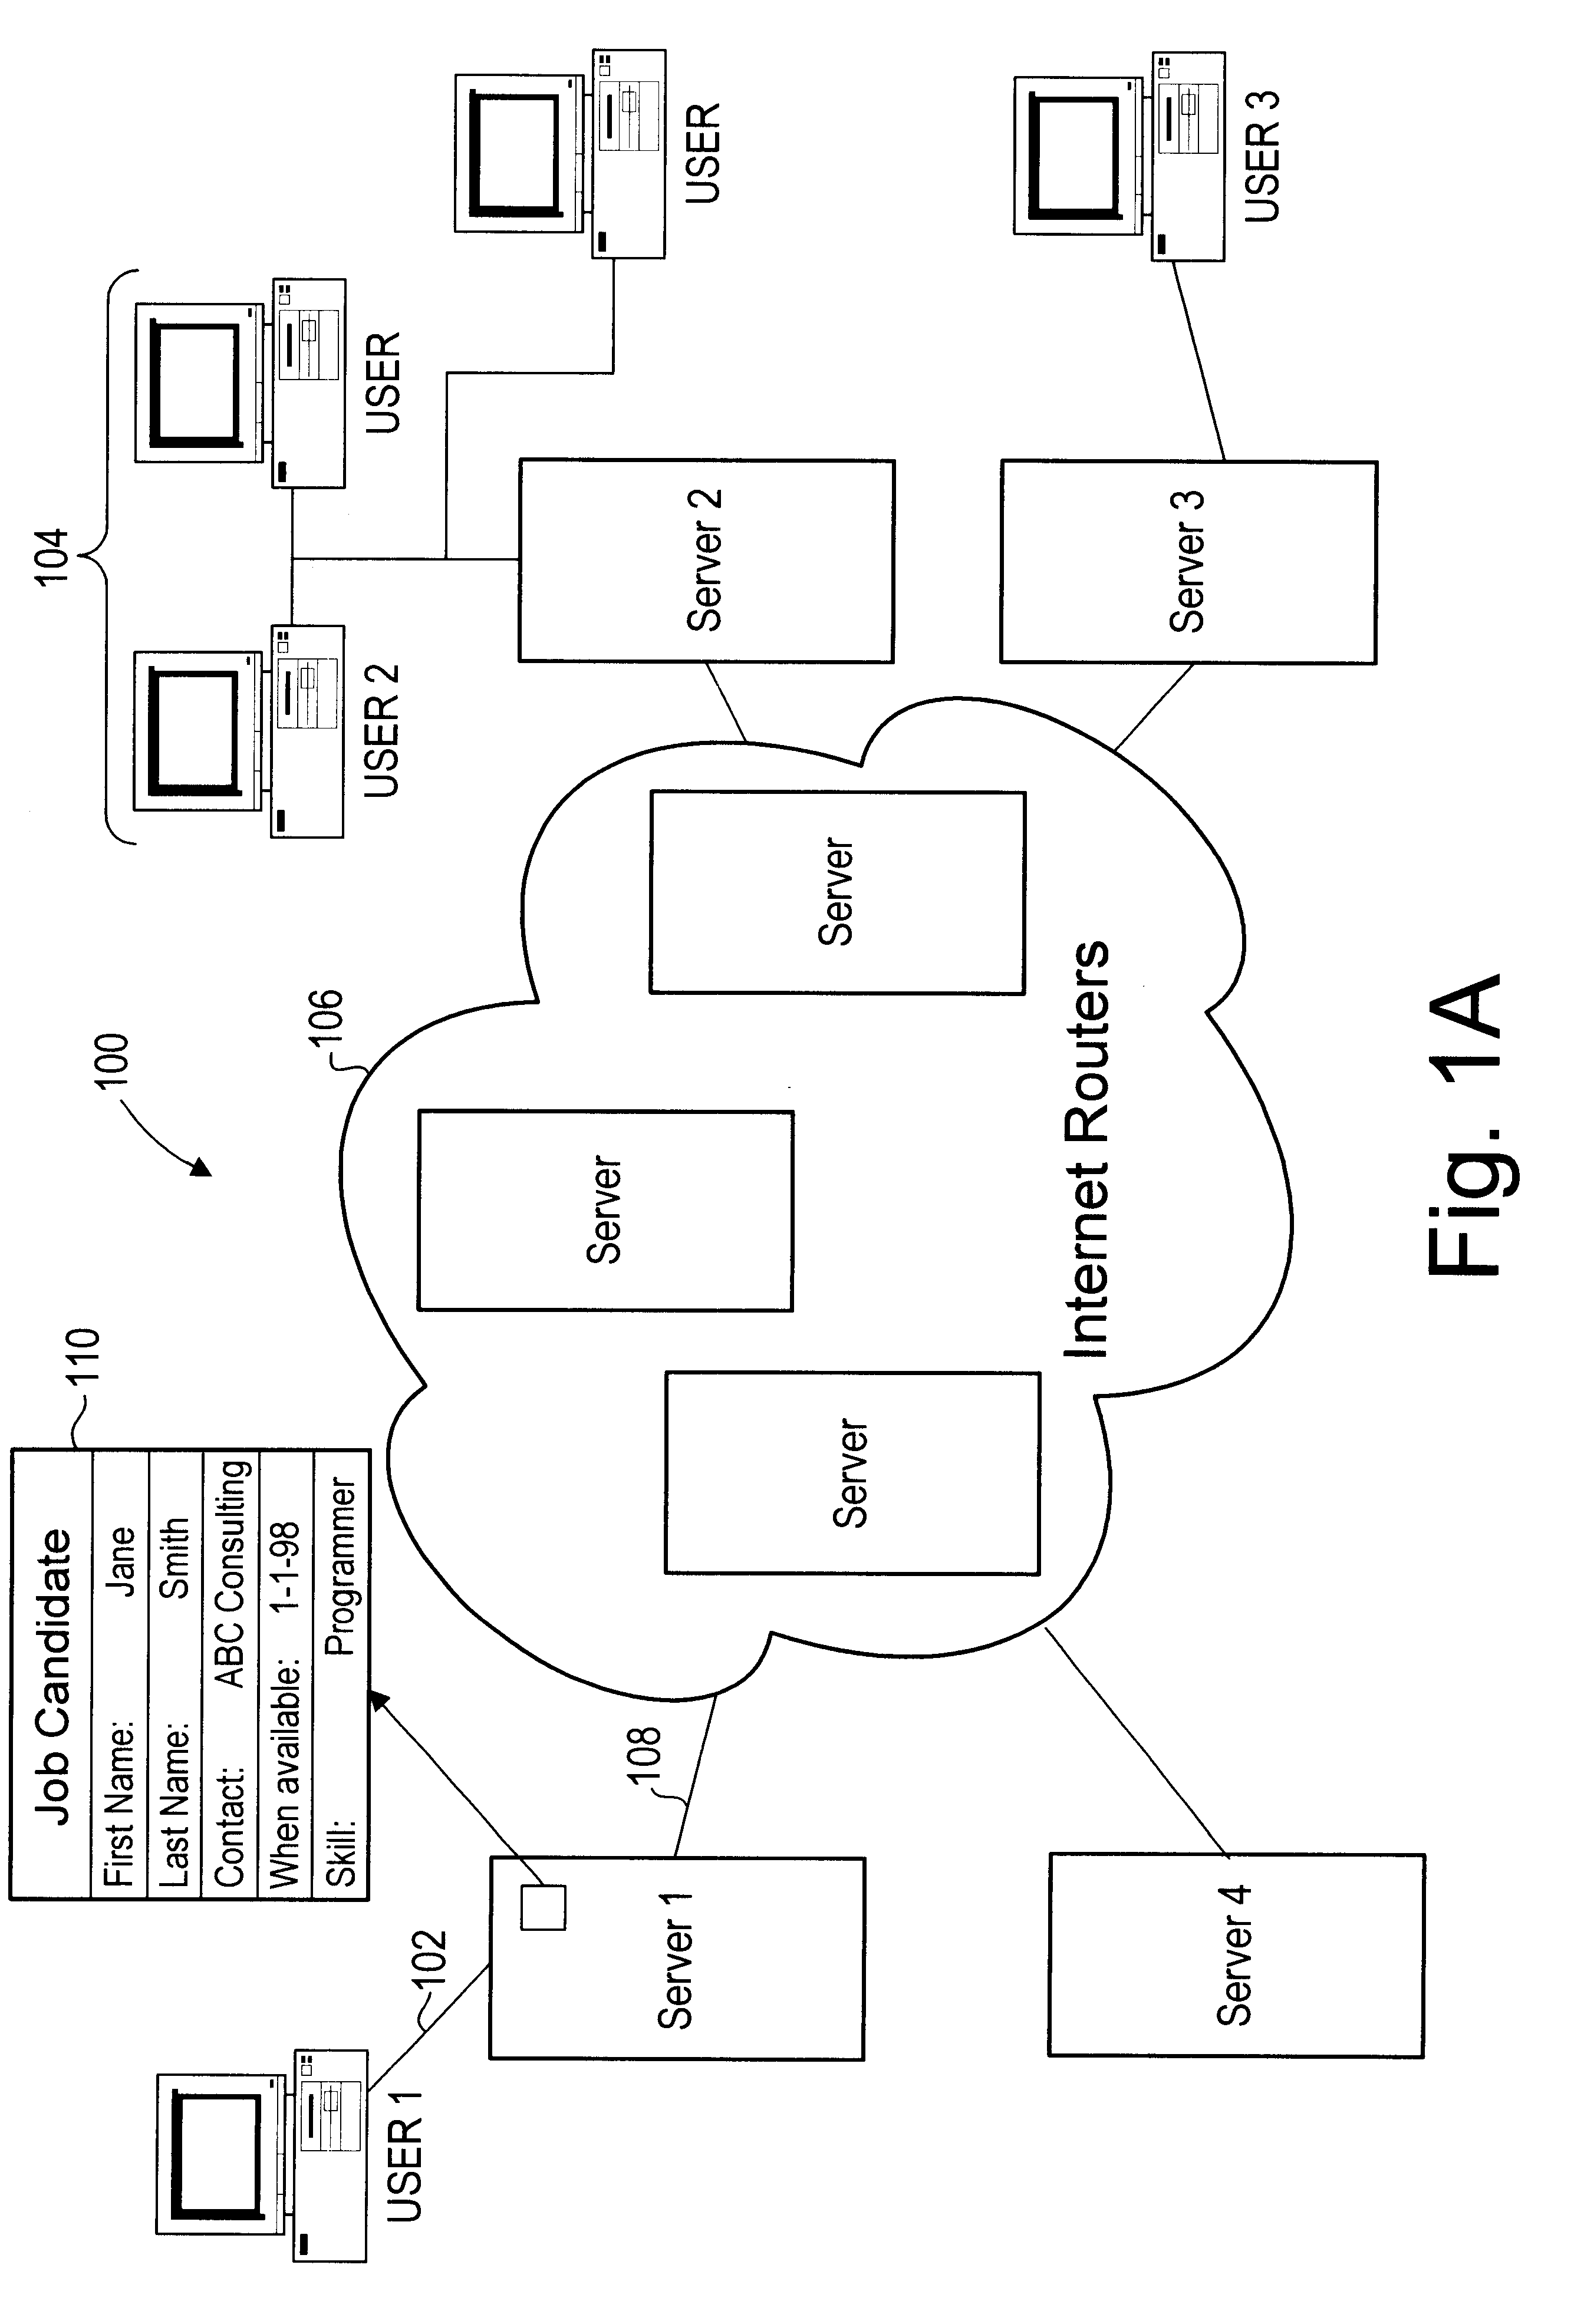 Extensible user interface for a distributed messaging framework in a computer network